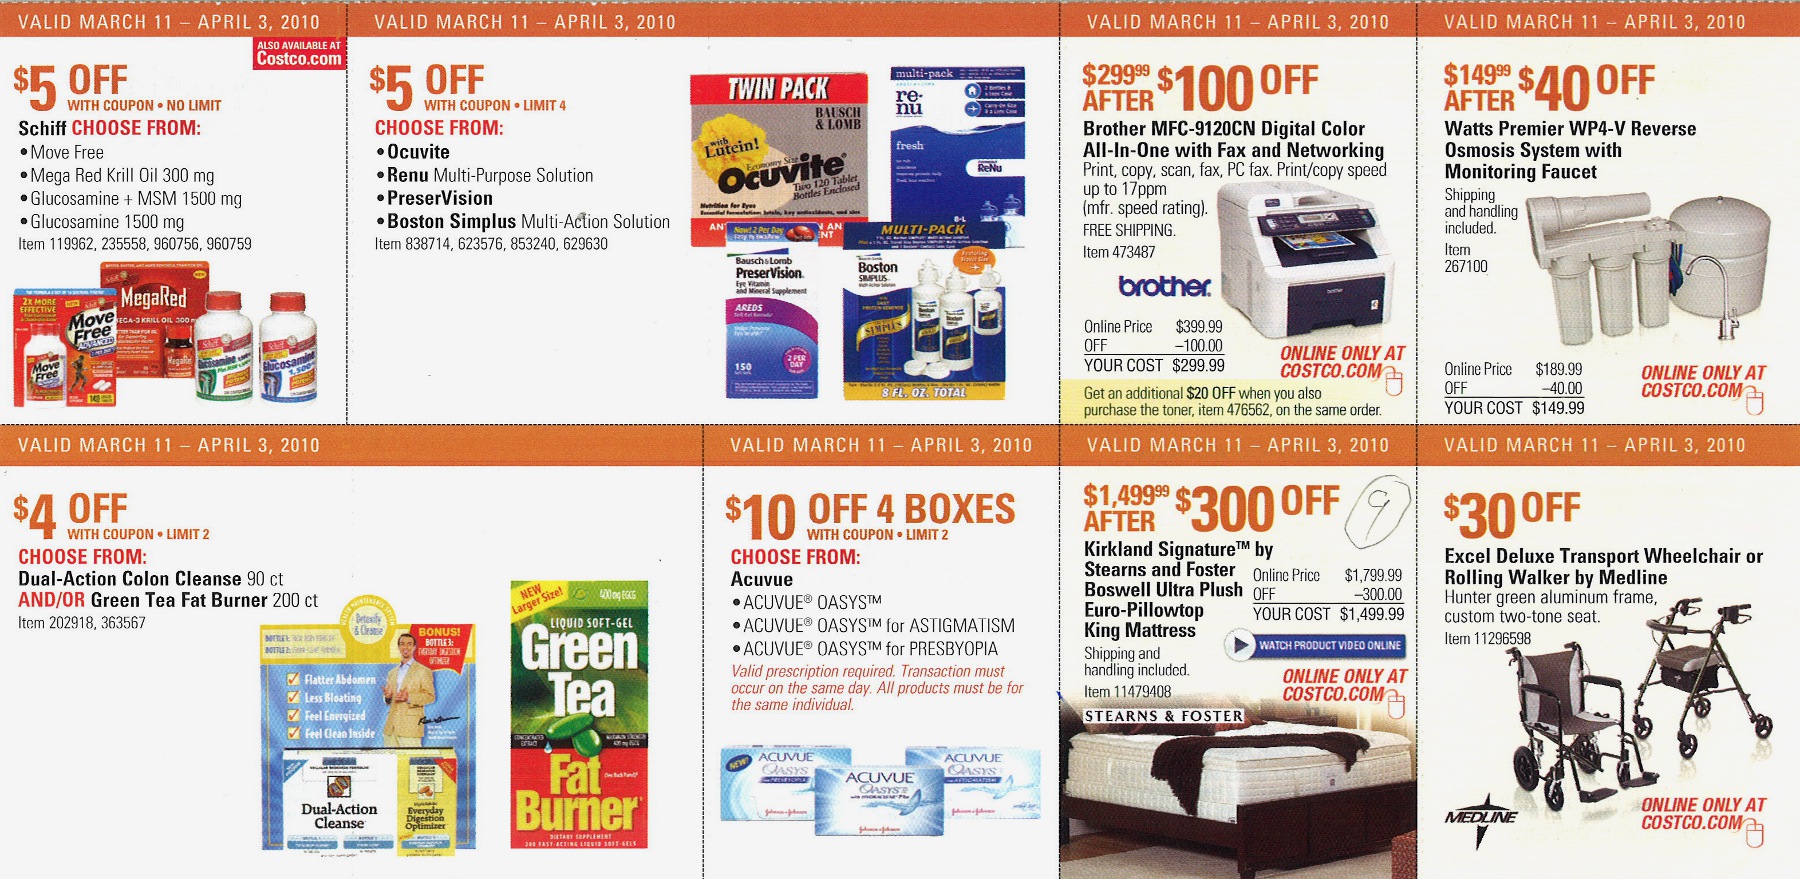 Coupon book full size page ->9<-